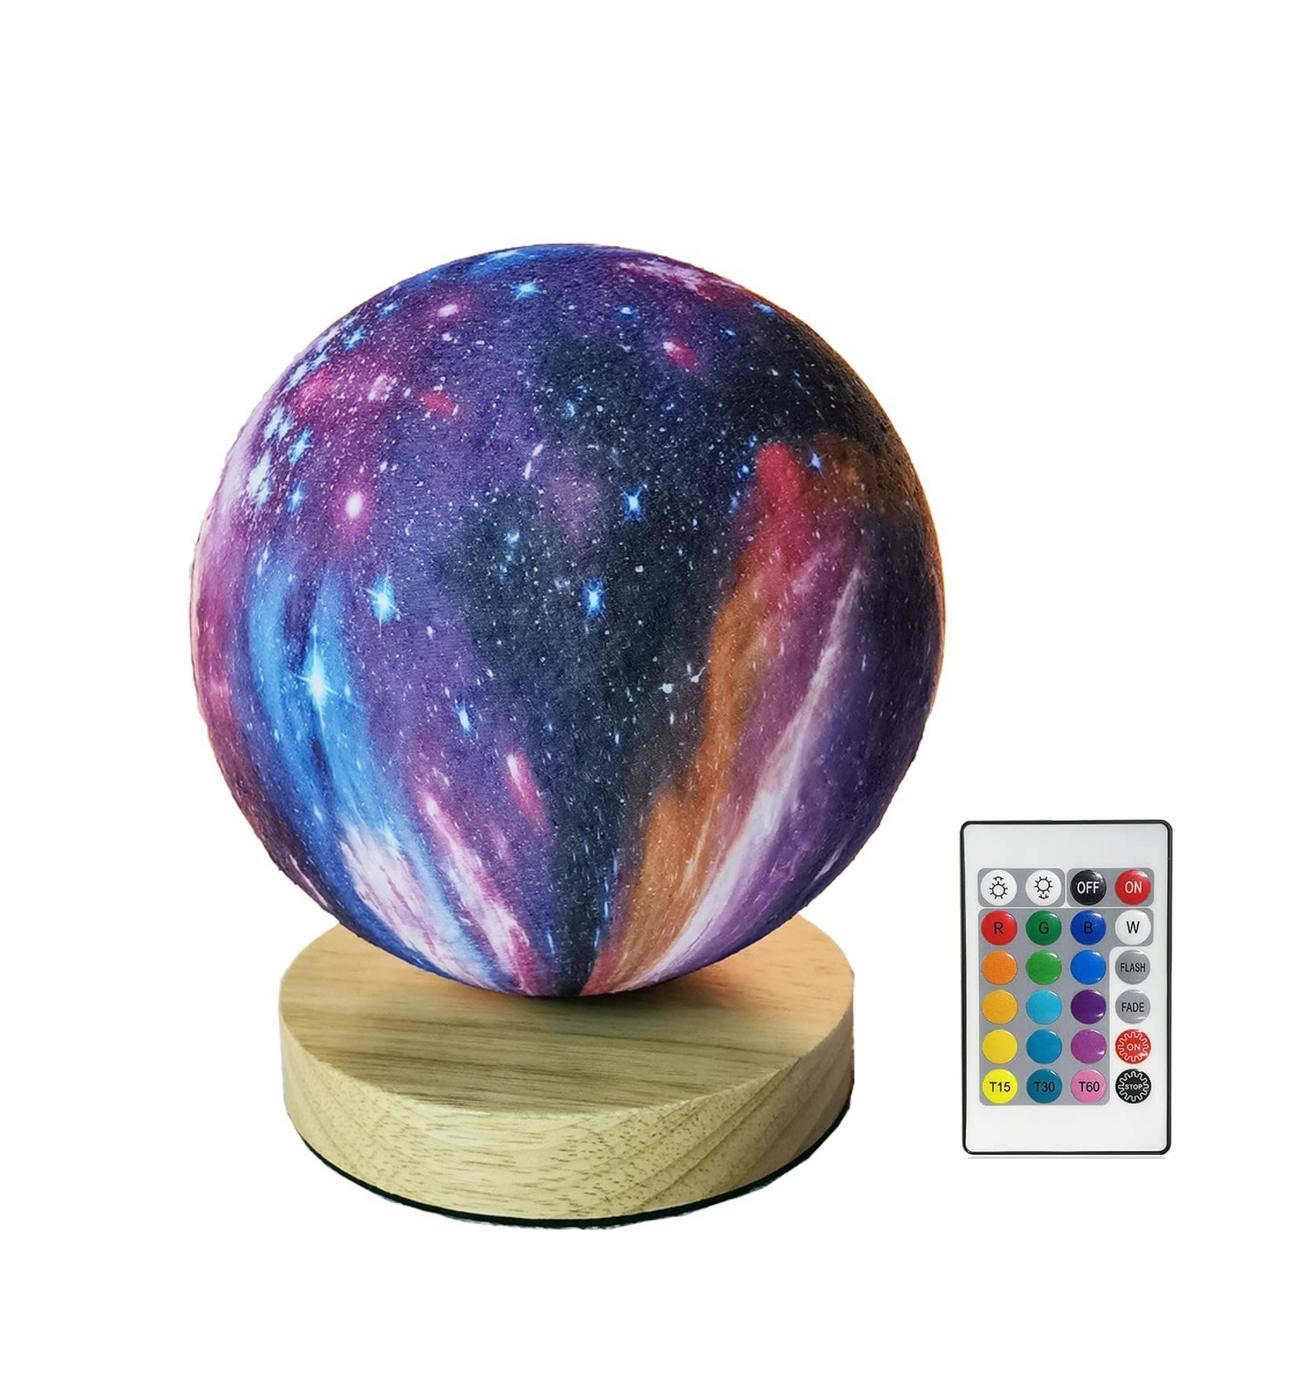 Rotating 15cm Galaxy Moon Night Light 16 Colour Rechargeable + Tough and Remote Control